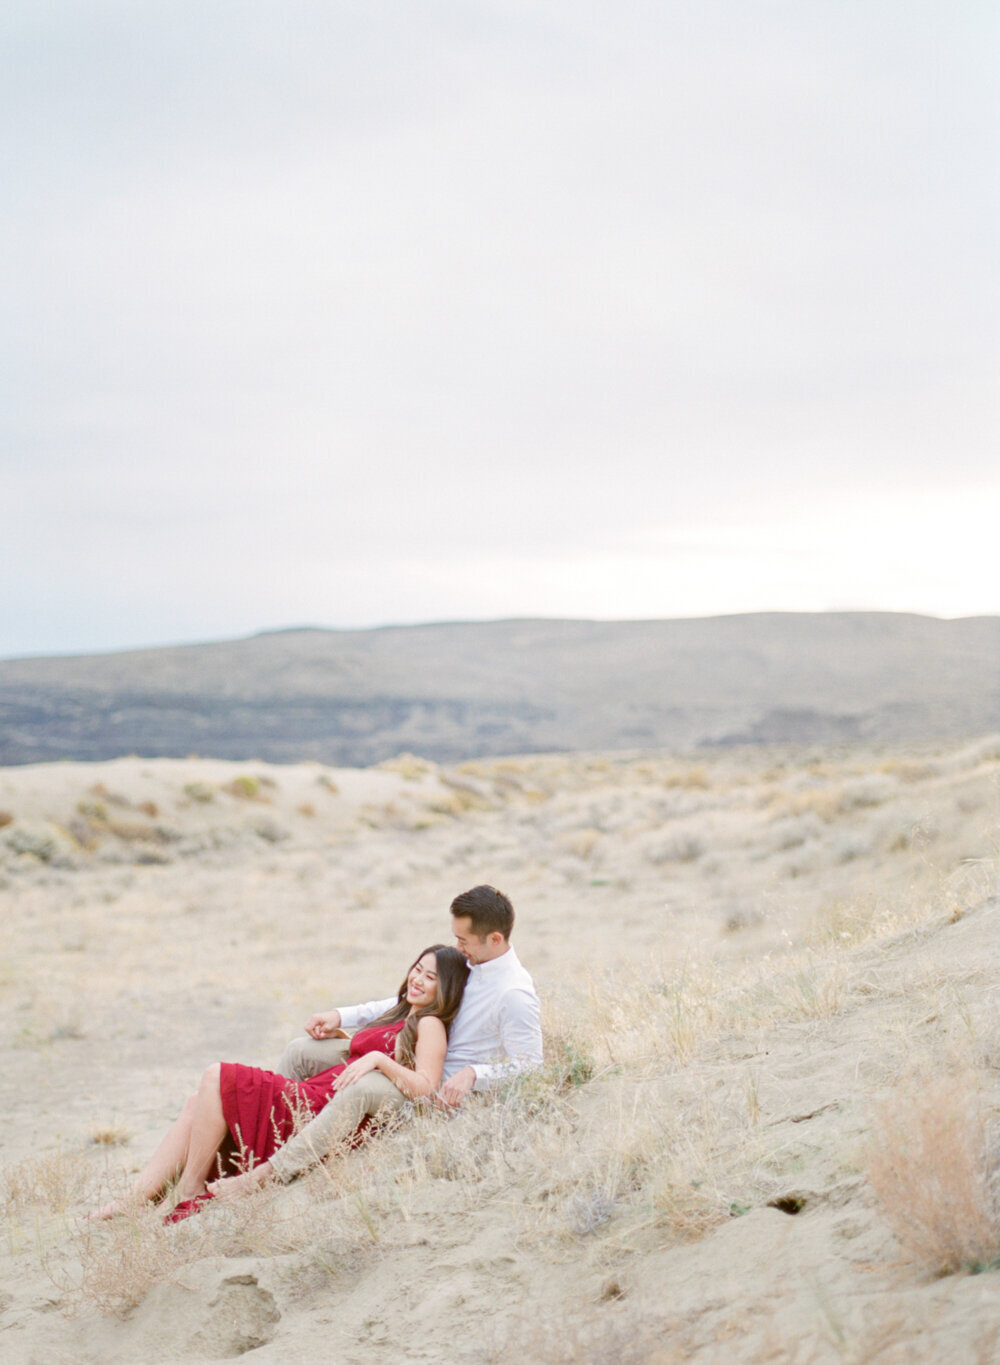 Eatern Washington Engagement Session - Best engagement locations in Seattle - Tetiana Photography - Film - Fine art - 3